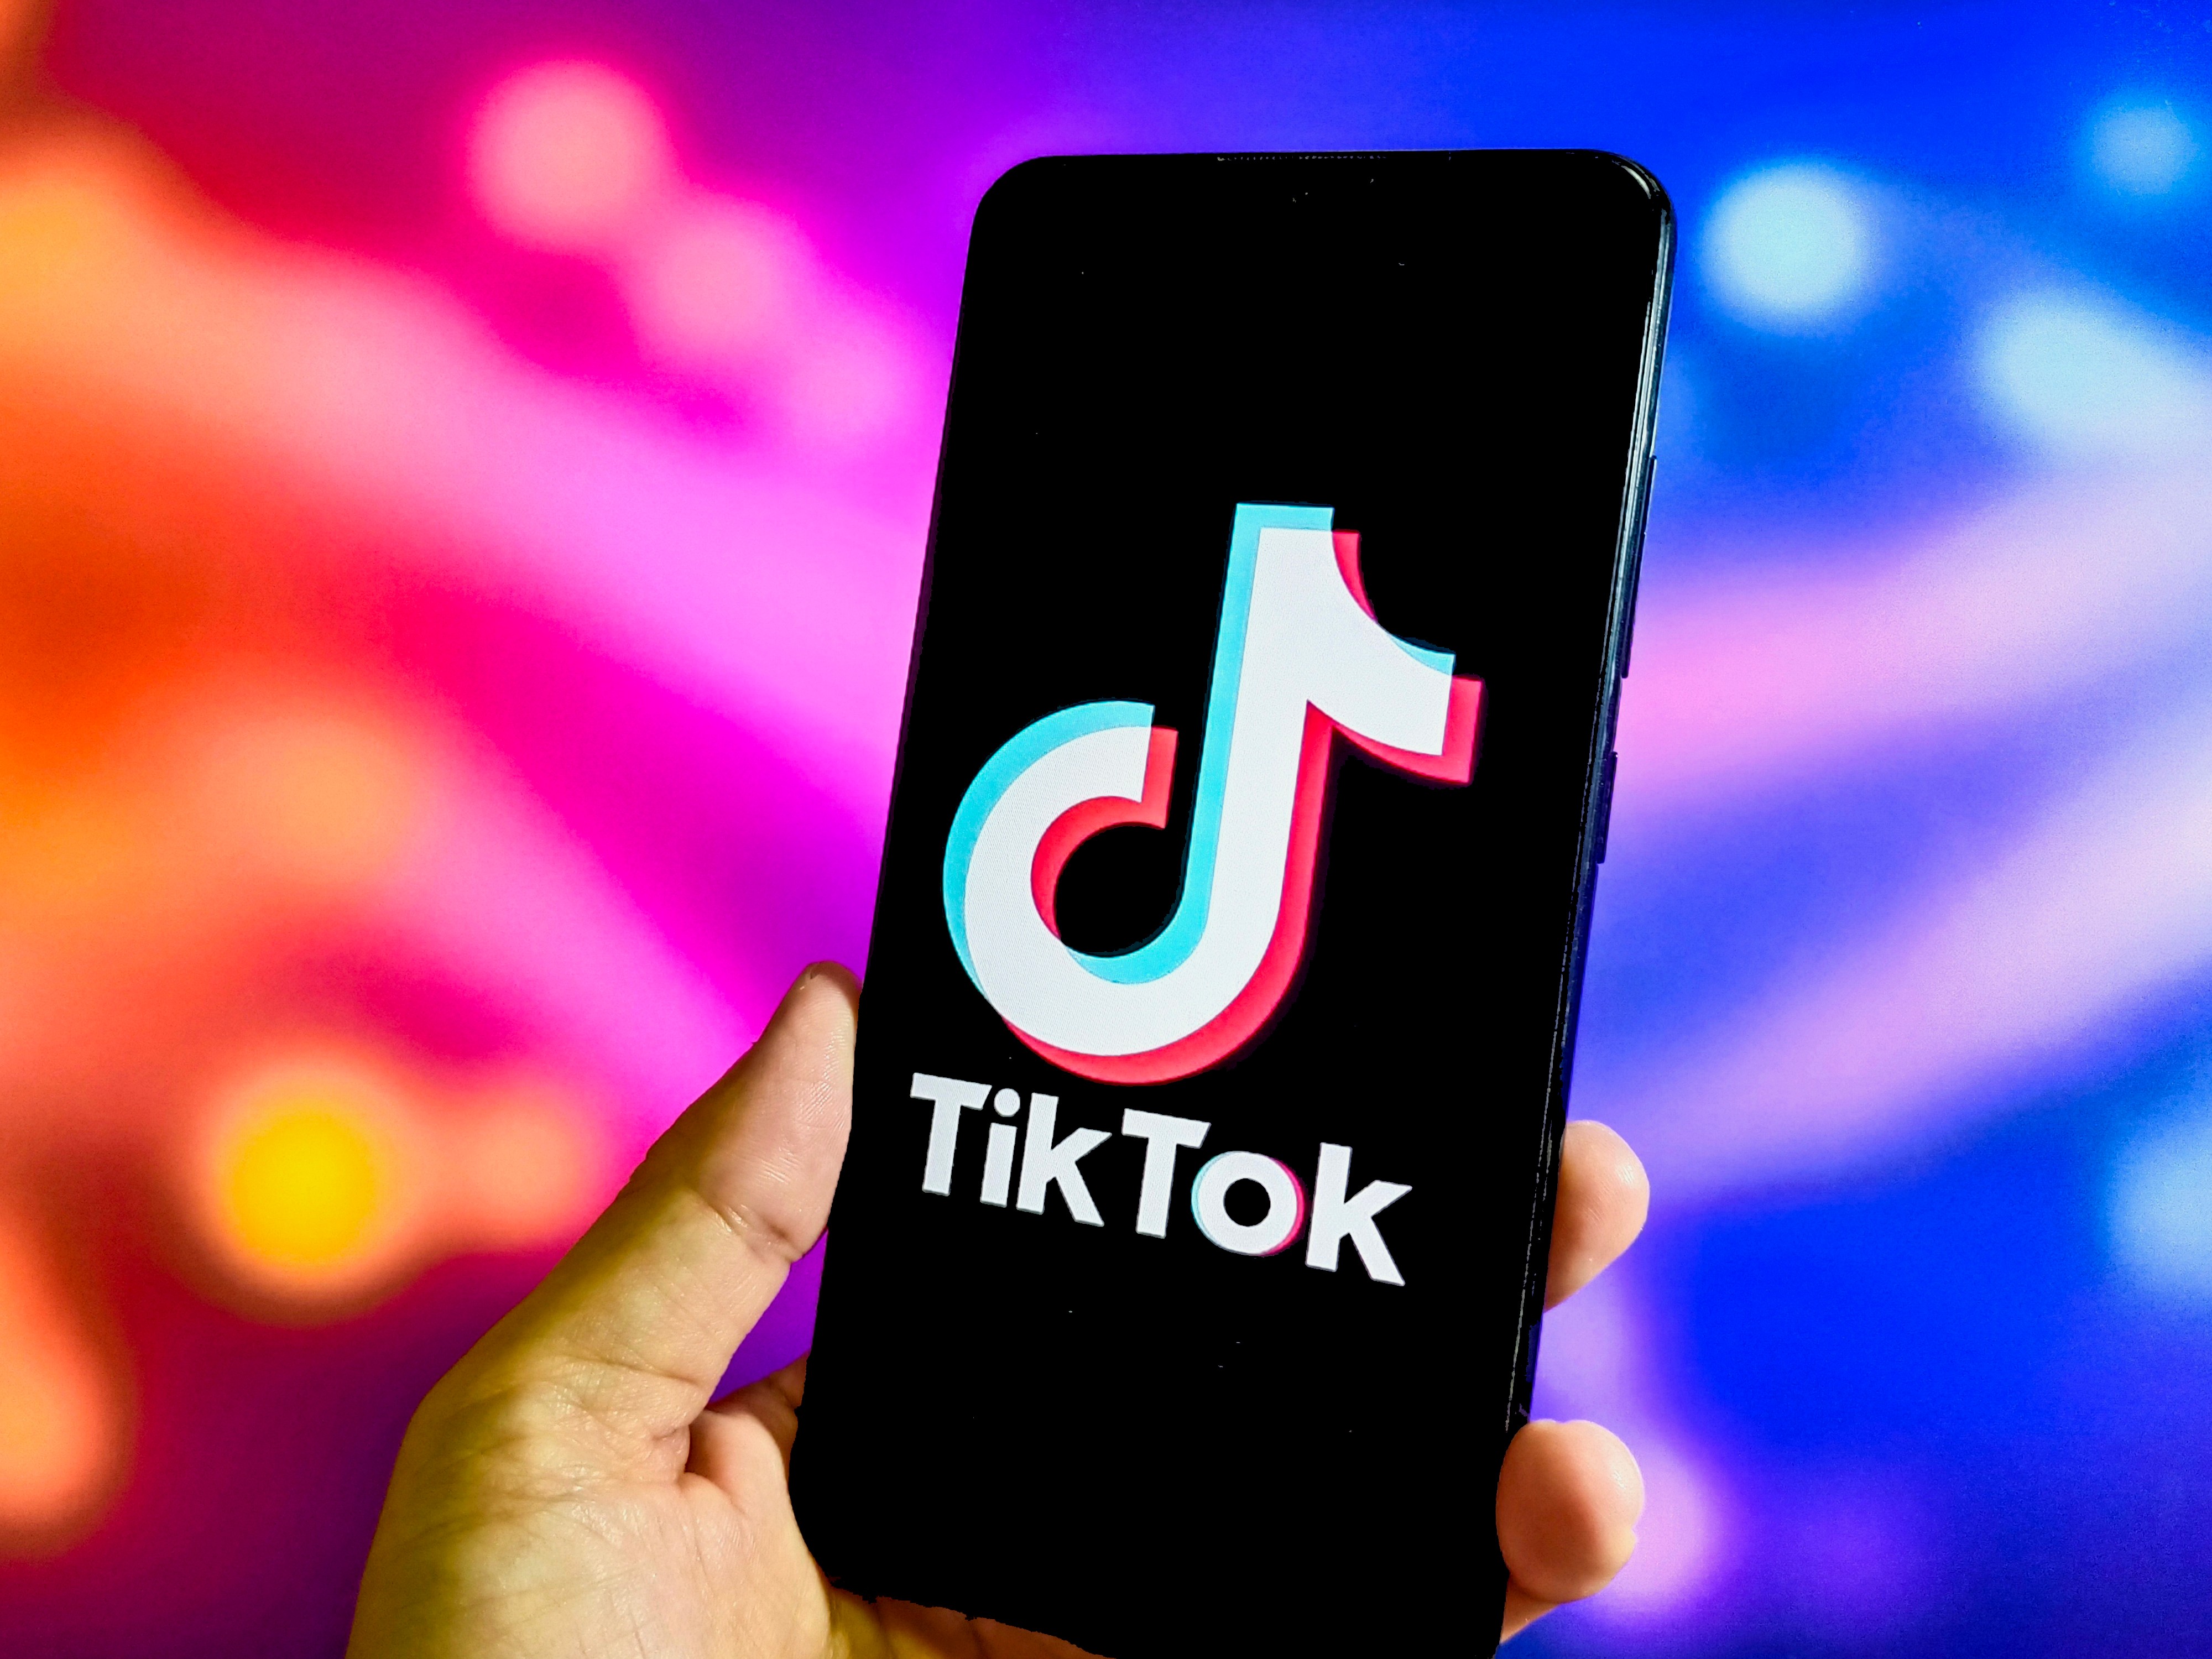 A Century-Old, Debunked Theory Is Fueling the TikTok Moral Panic